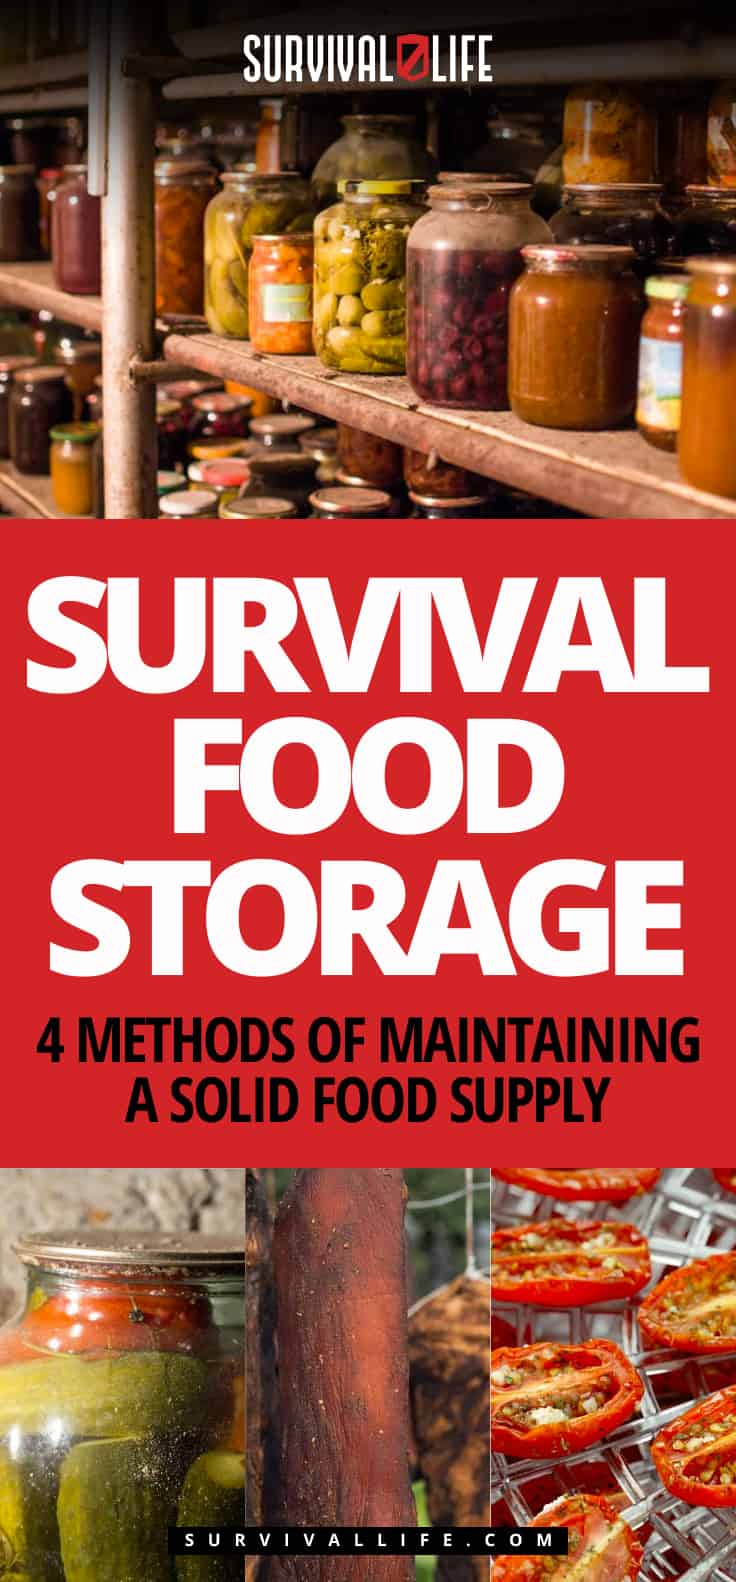 Survival Food Storage | 4 Methods Of Maintaining A Solid Food Supply